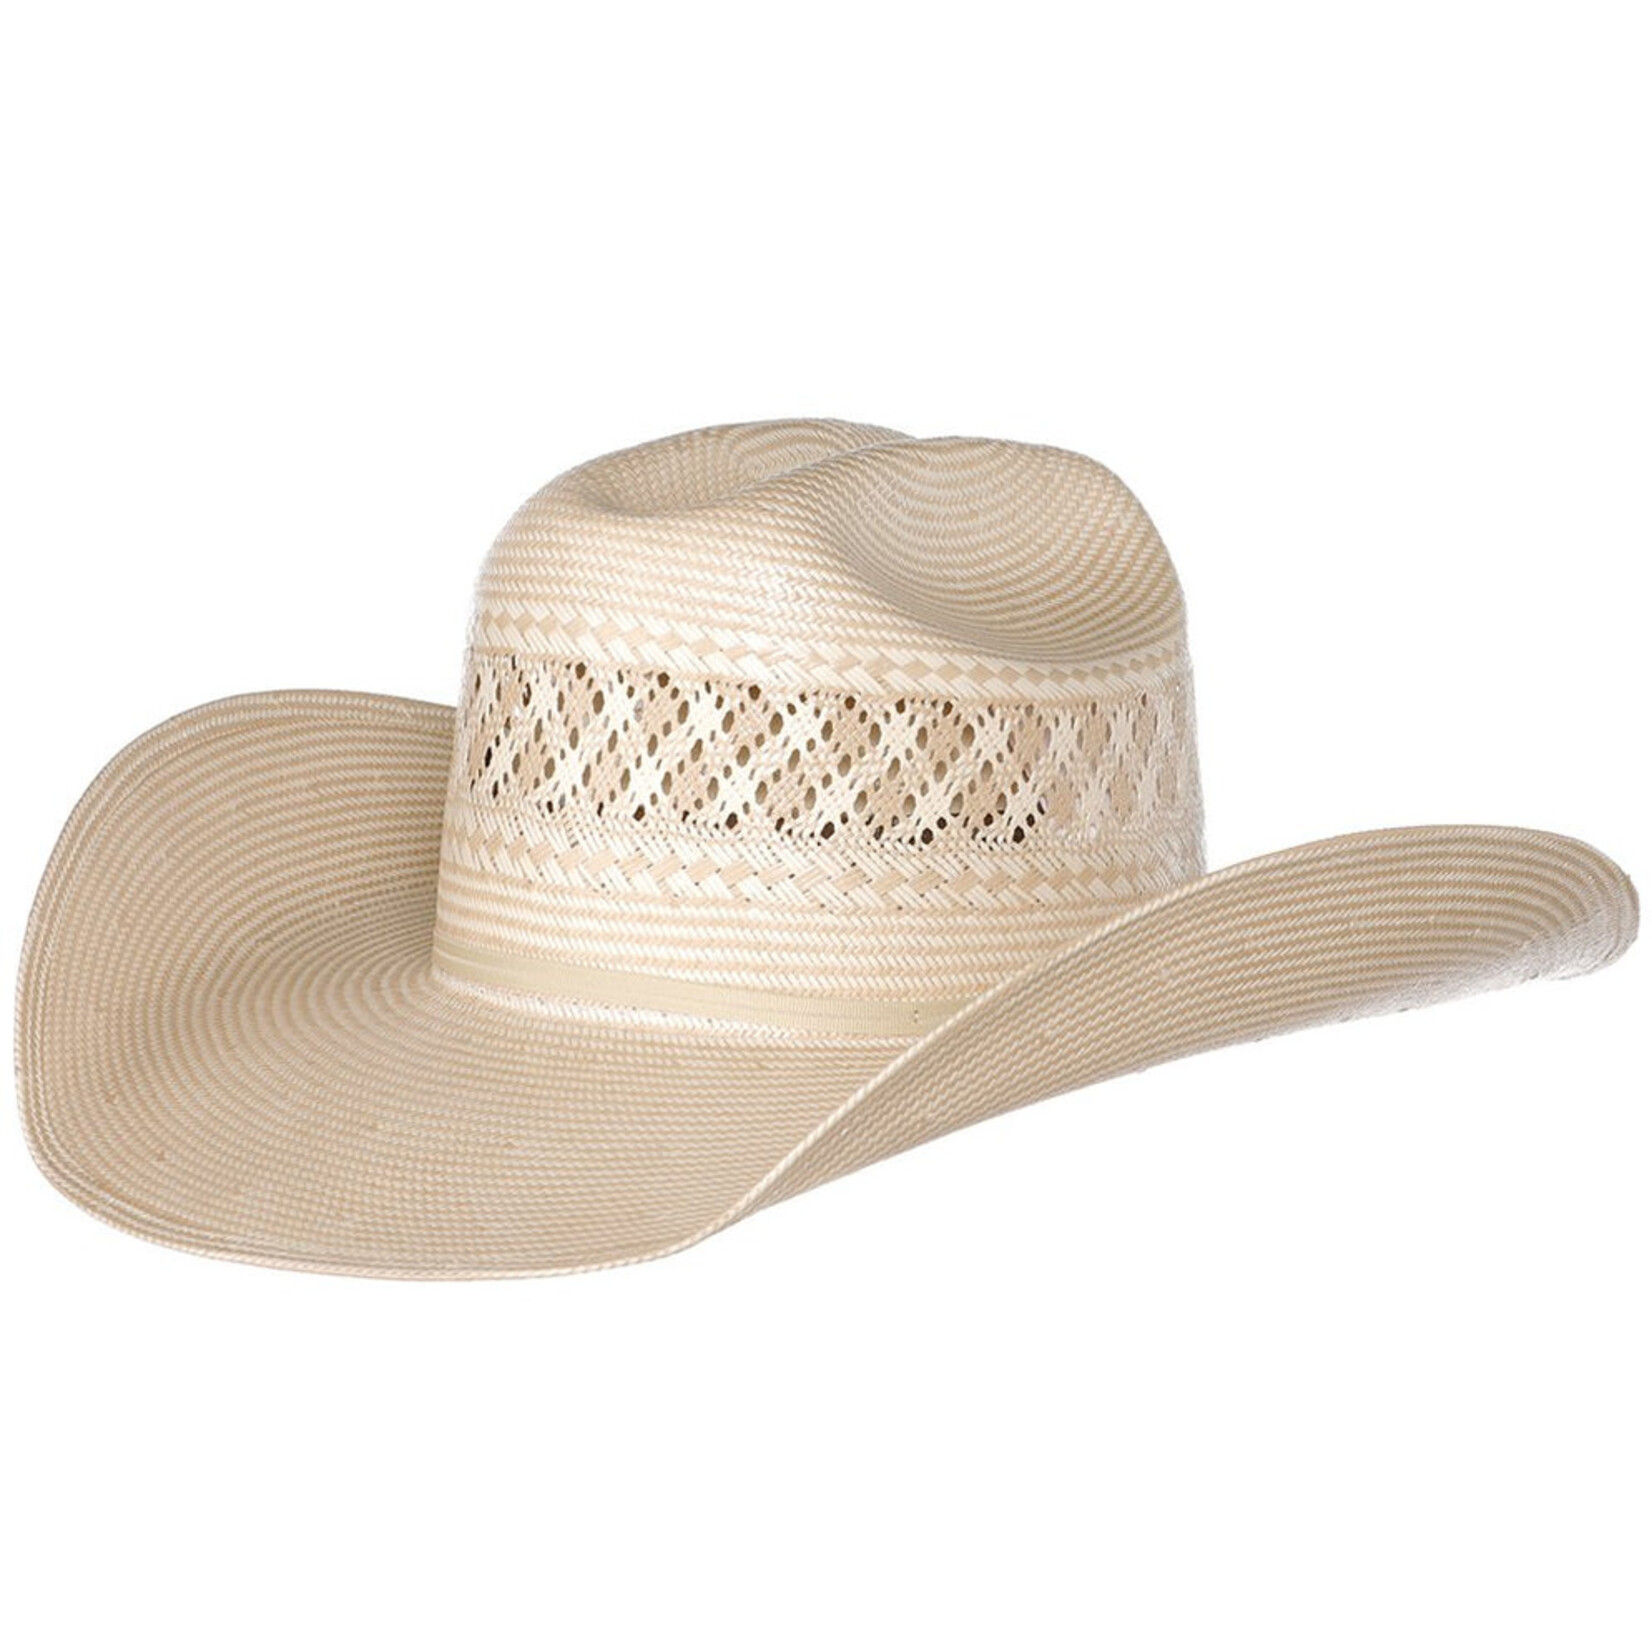 American Hat Straw 2Tone Vented Tan/Ivory